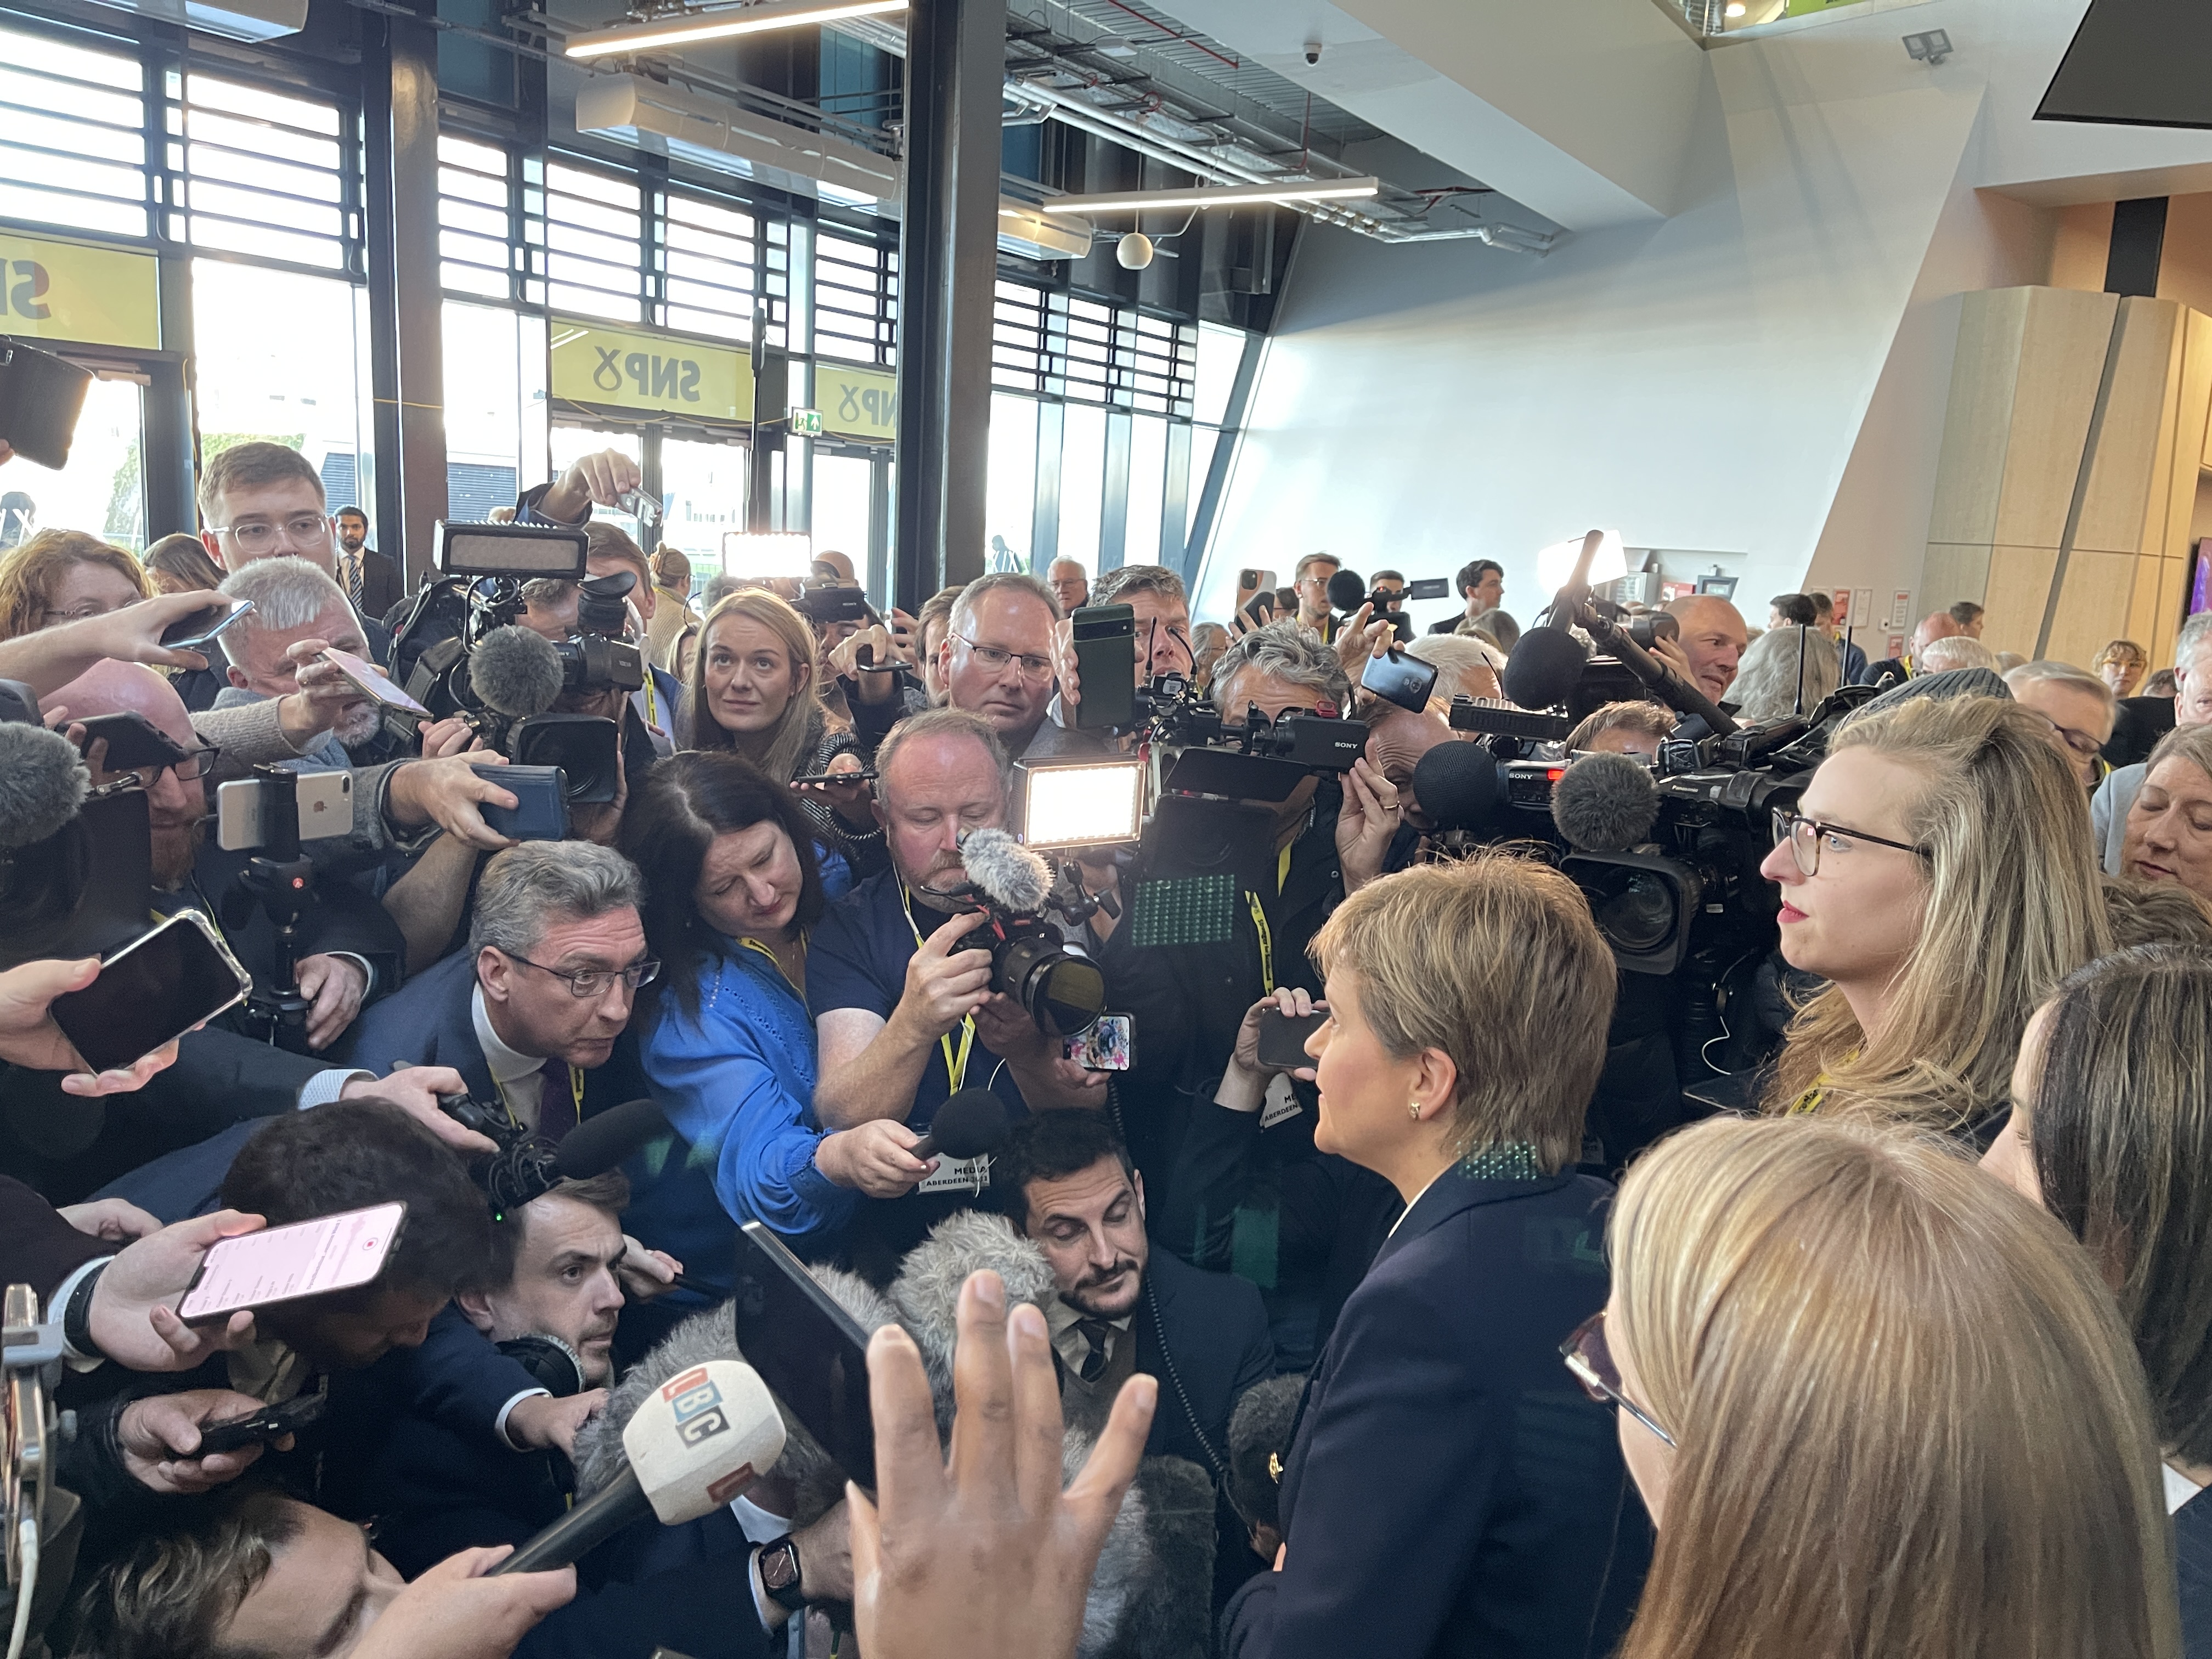 Nicola Sturgeon was interviewed by journalists on Monday afternoon at the SNP conference in Aberdeen.